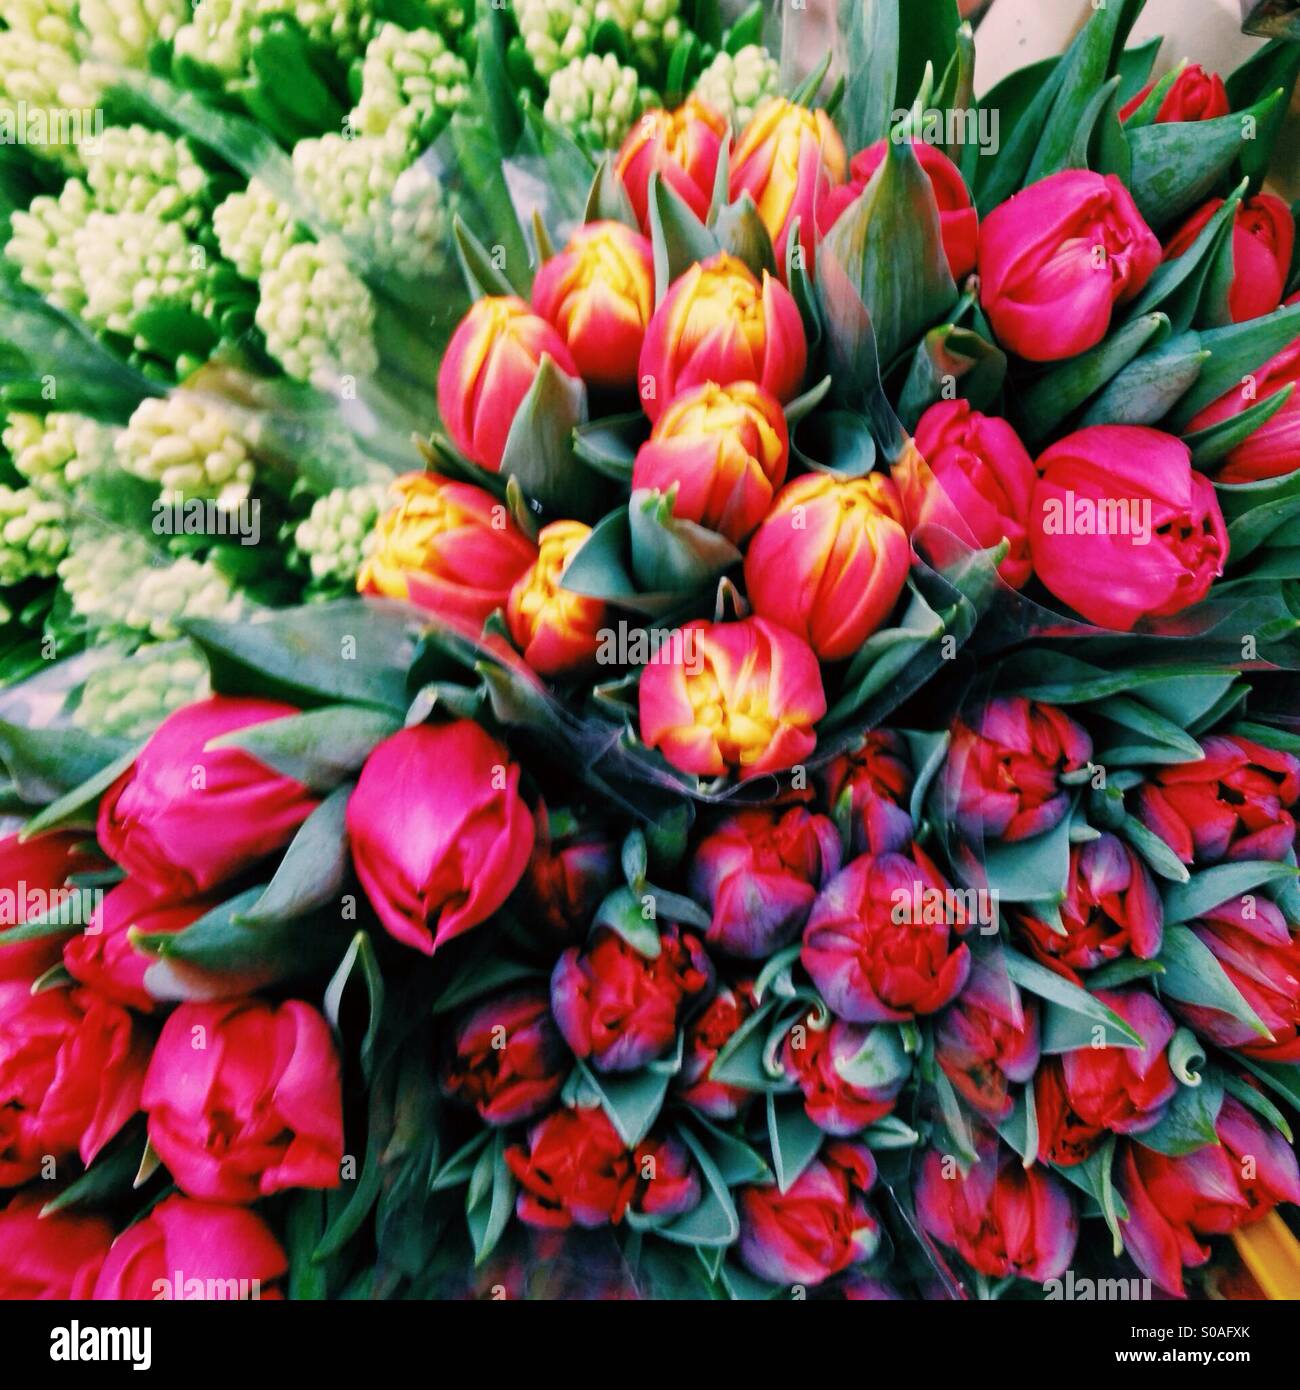 Tulips and flowers are in full bloom in this beautiful bouquet. Stock Photo